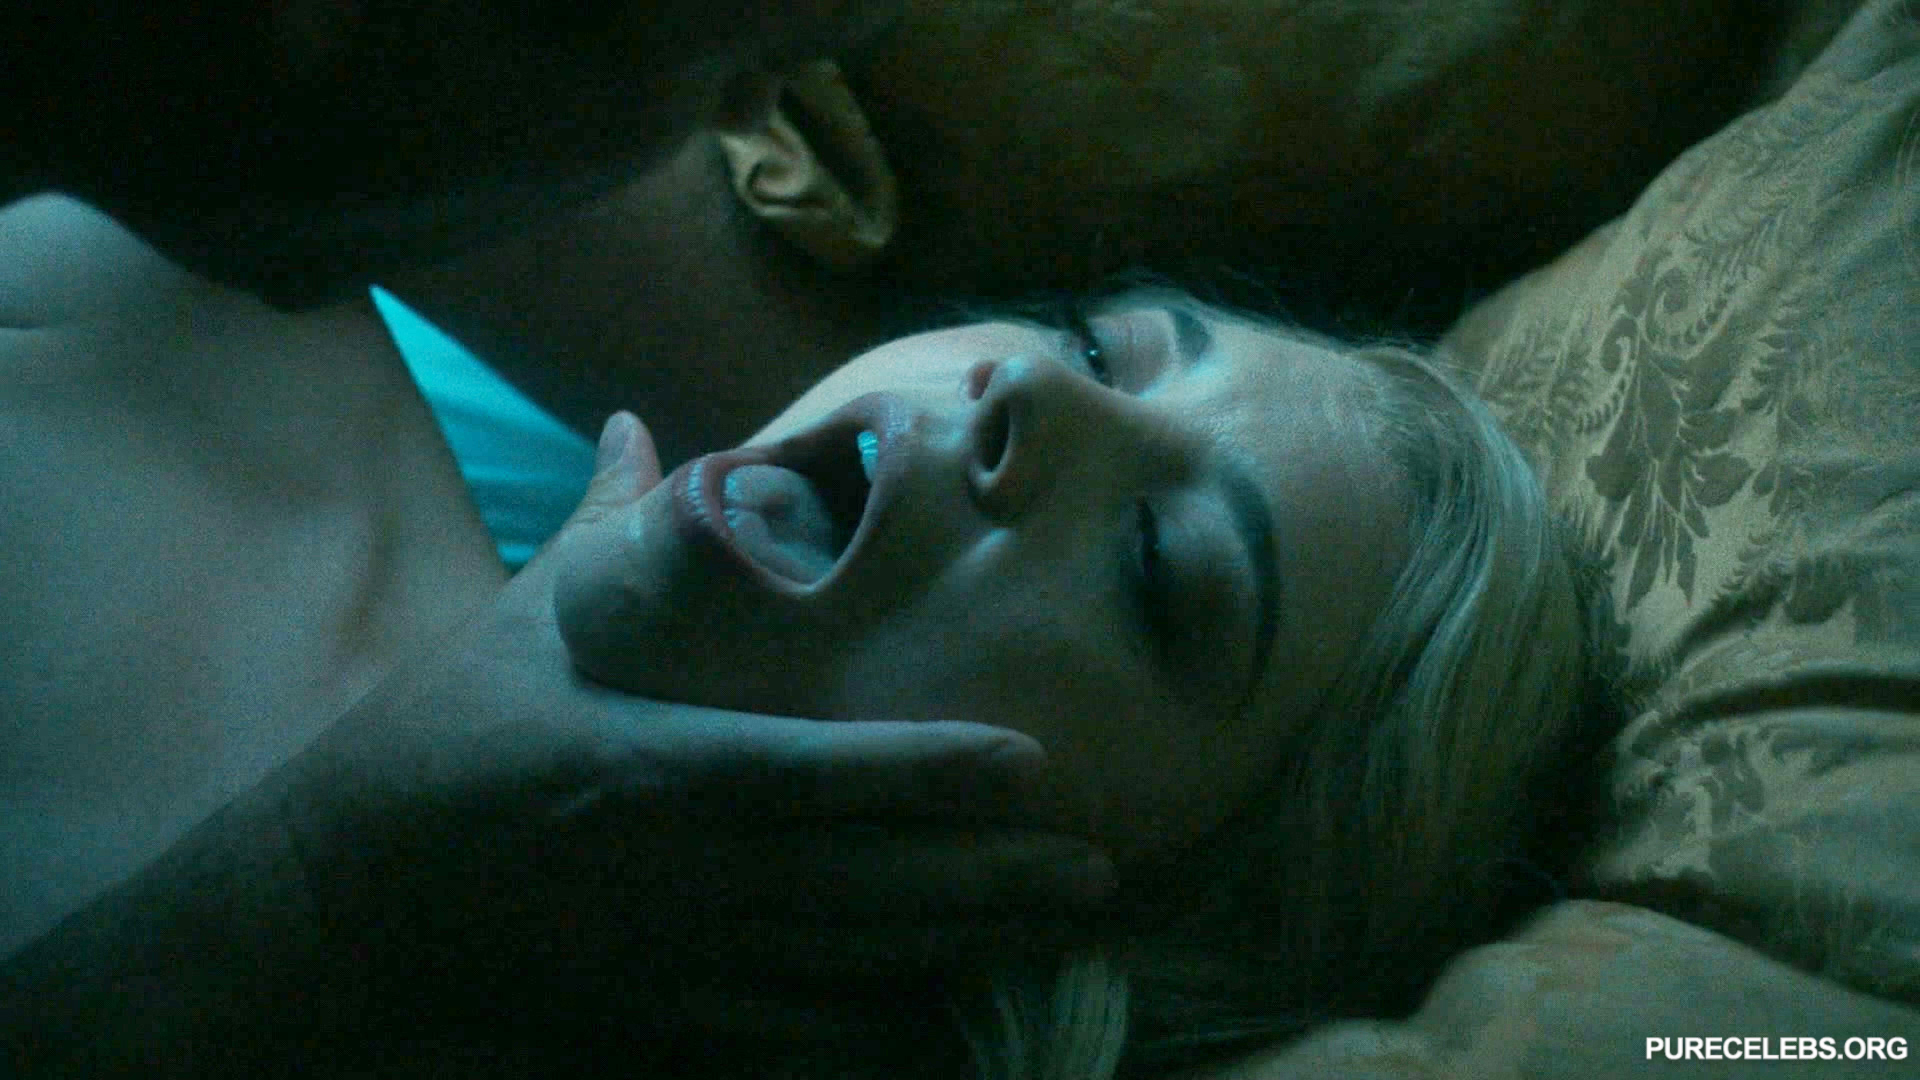 English actress Natalie Dormer will appear in nude and sex scenes in Penny Dreadful...